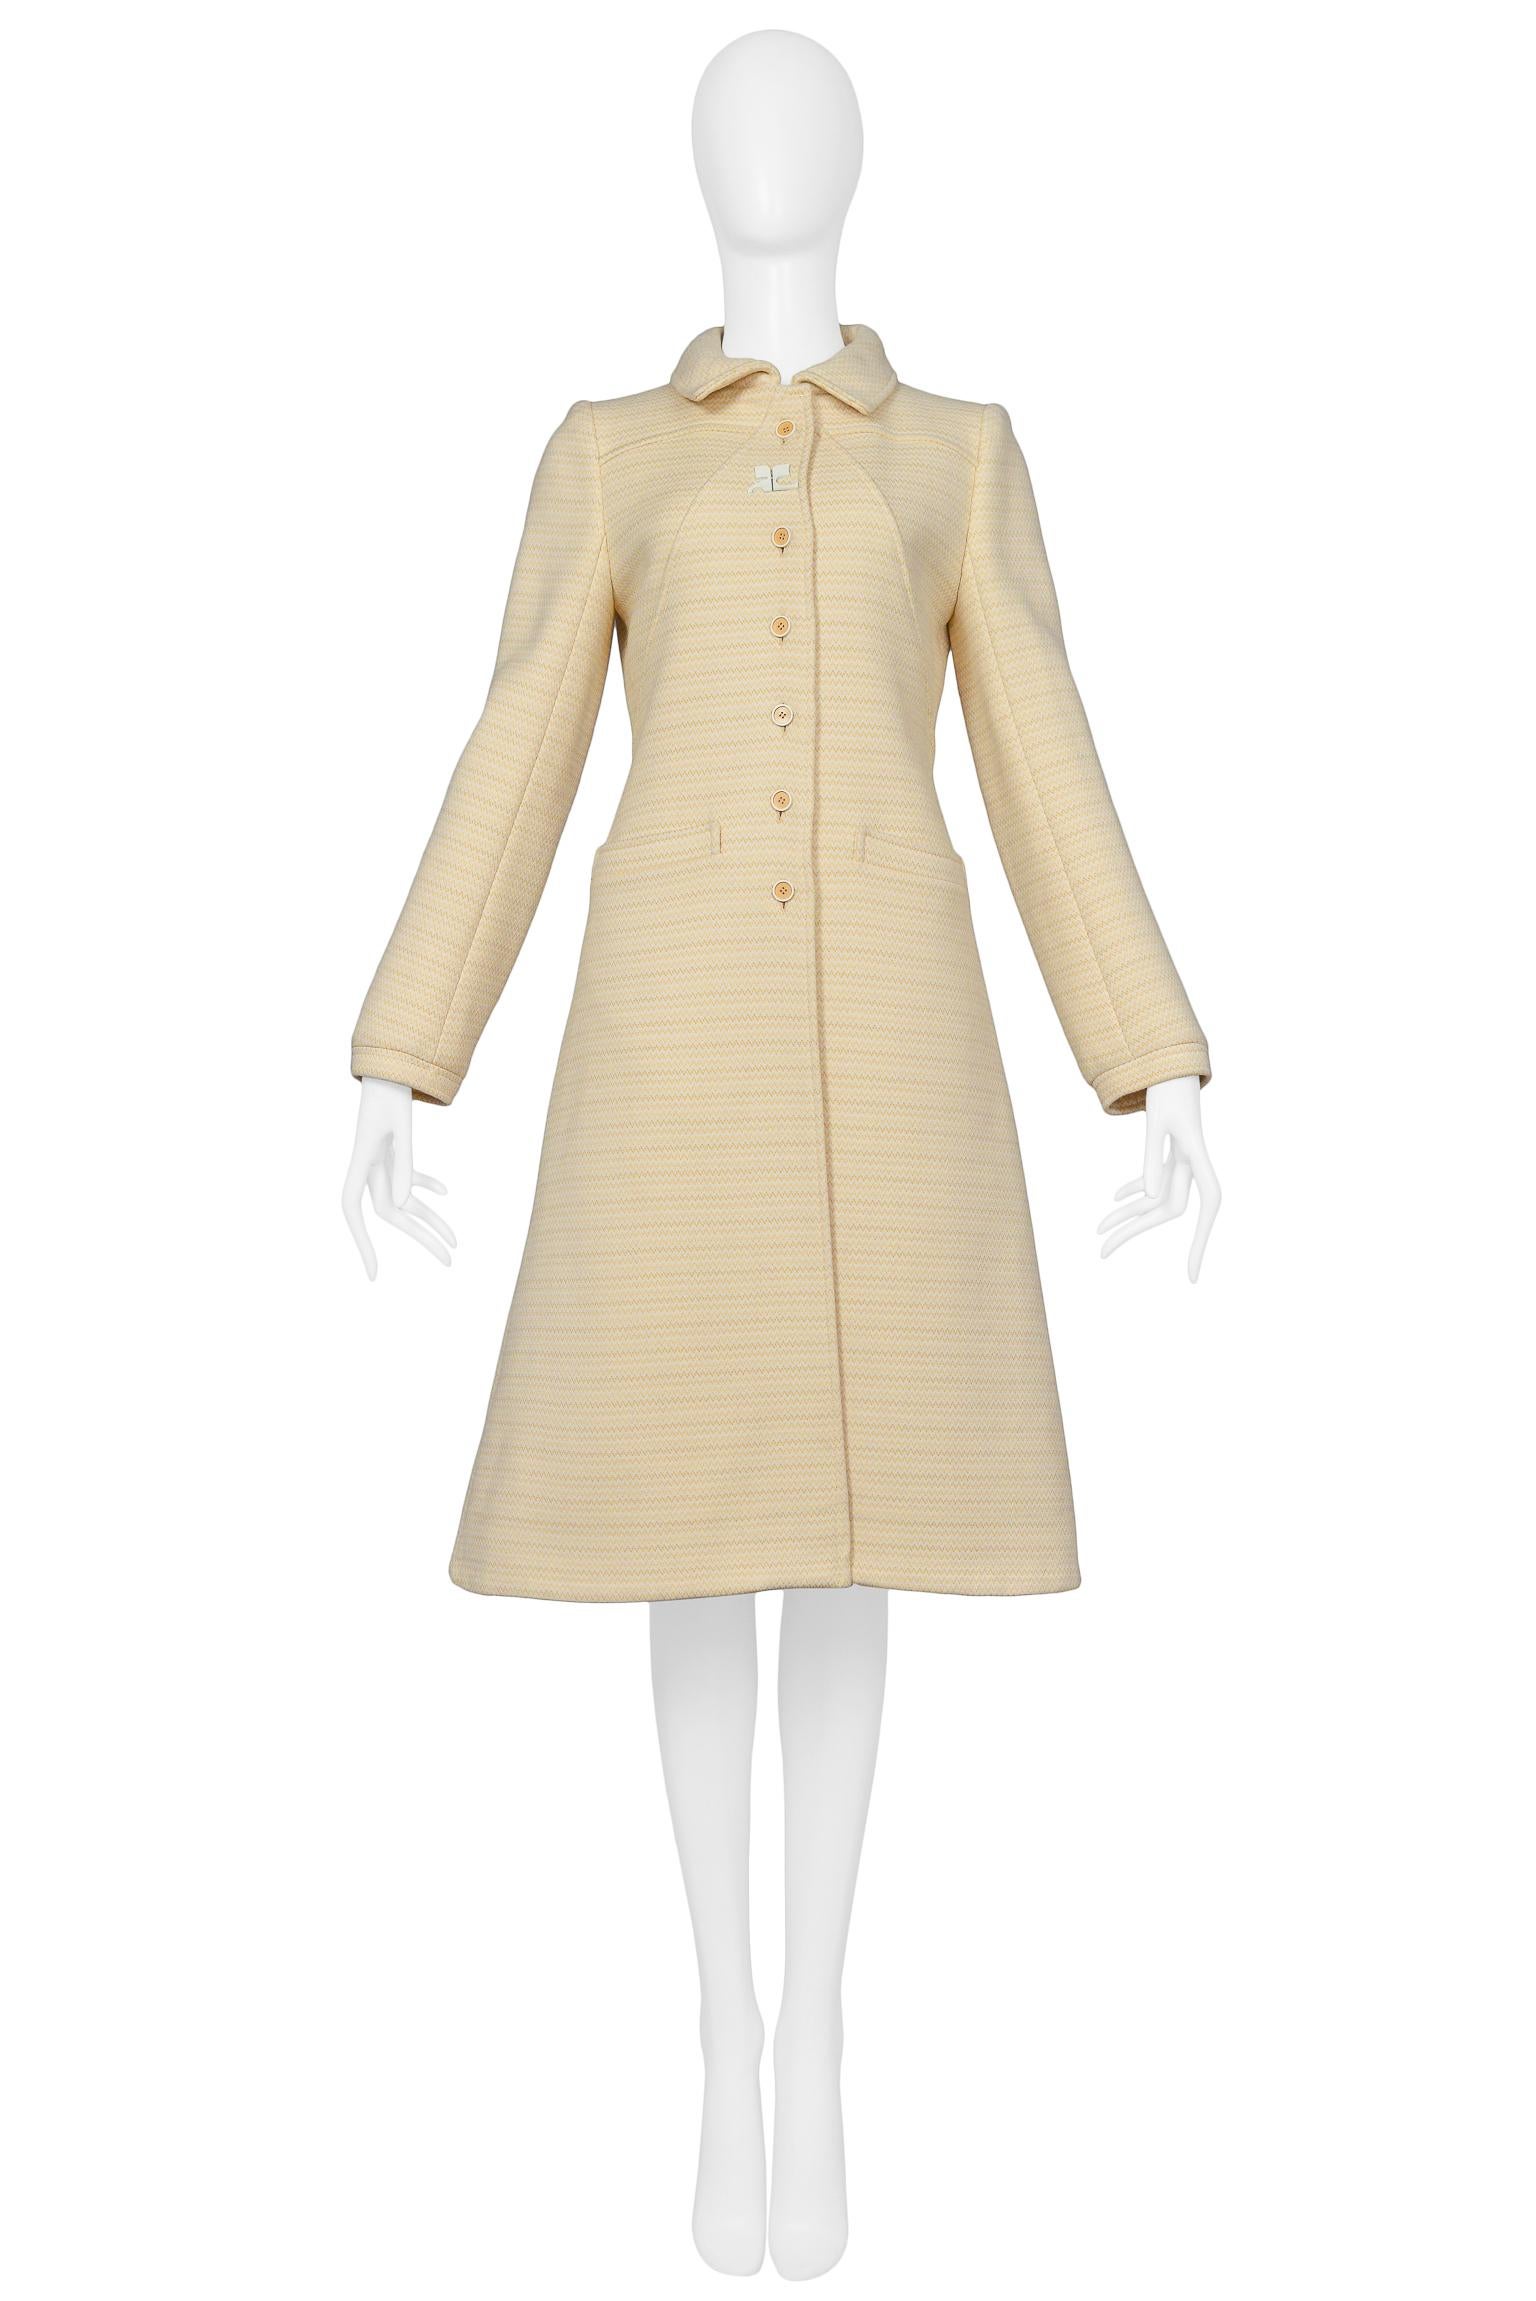 Vintage Andre Courreges peach & cream wool collared winter coat with defined yoke, front welt pockets, button front closure and white Courreges logo at neckline.
Please inquire for additional images.

Excellent Vintage